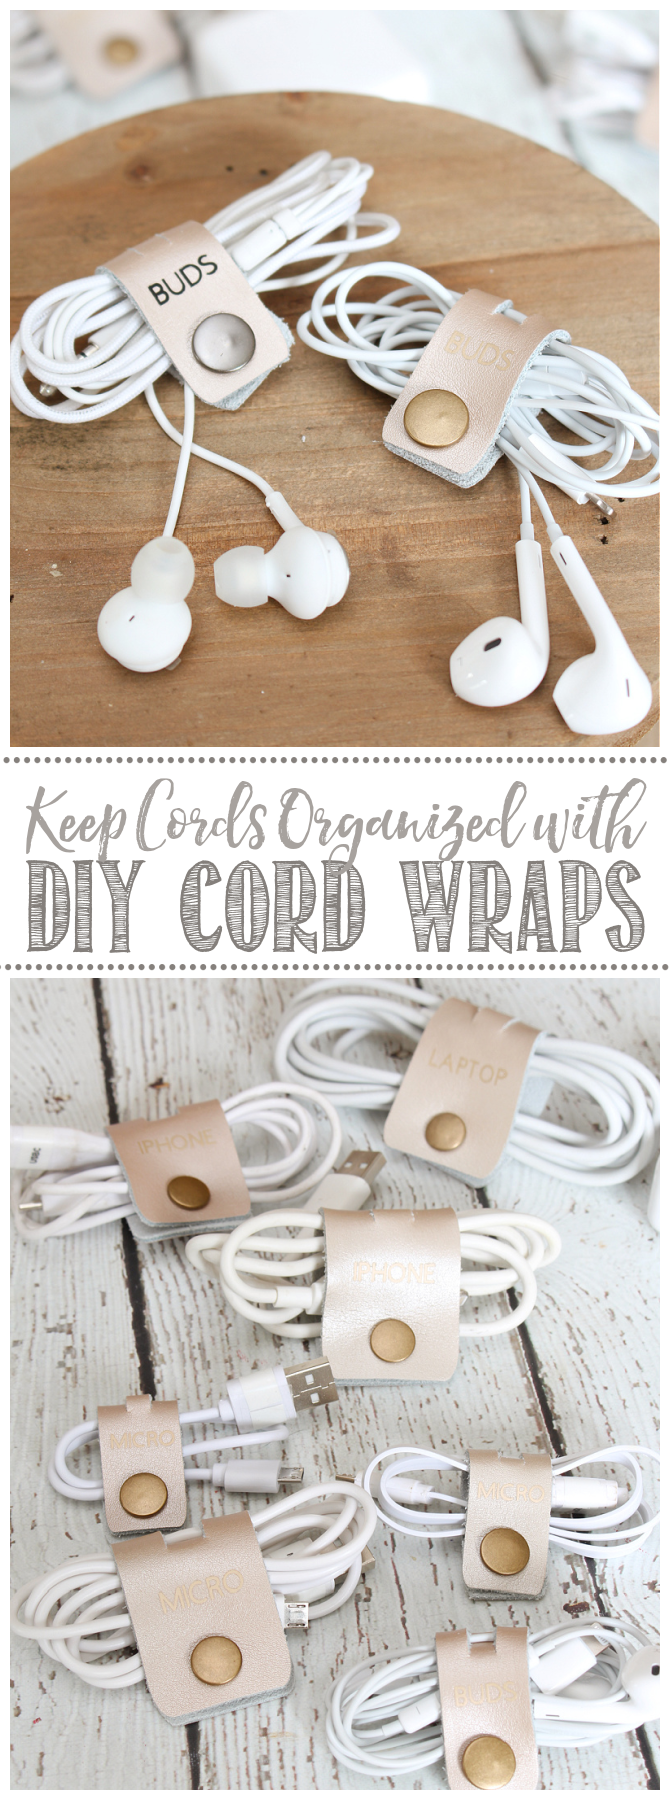 https://www.cleanandscentsible.com/wp-content/uploads/2021/04/DIY-Cord-Wraps-1.png